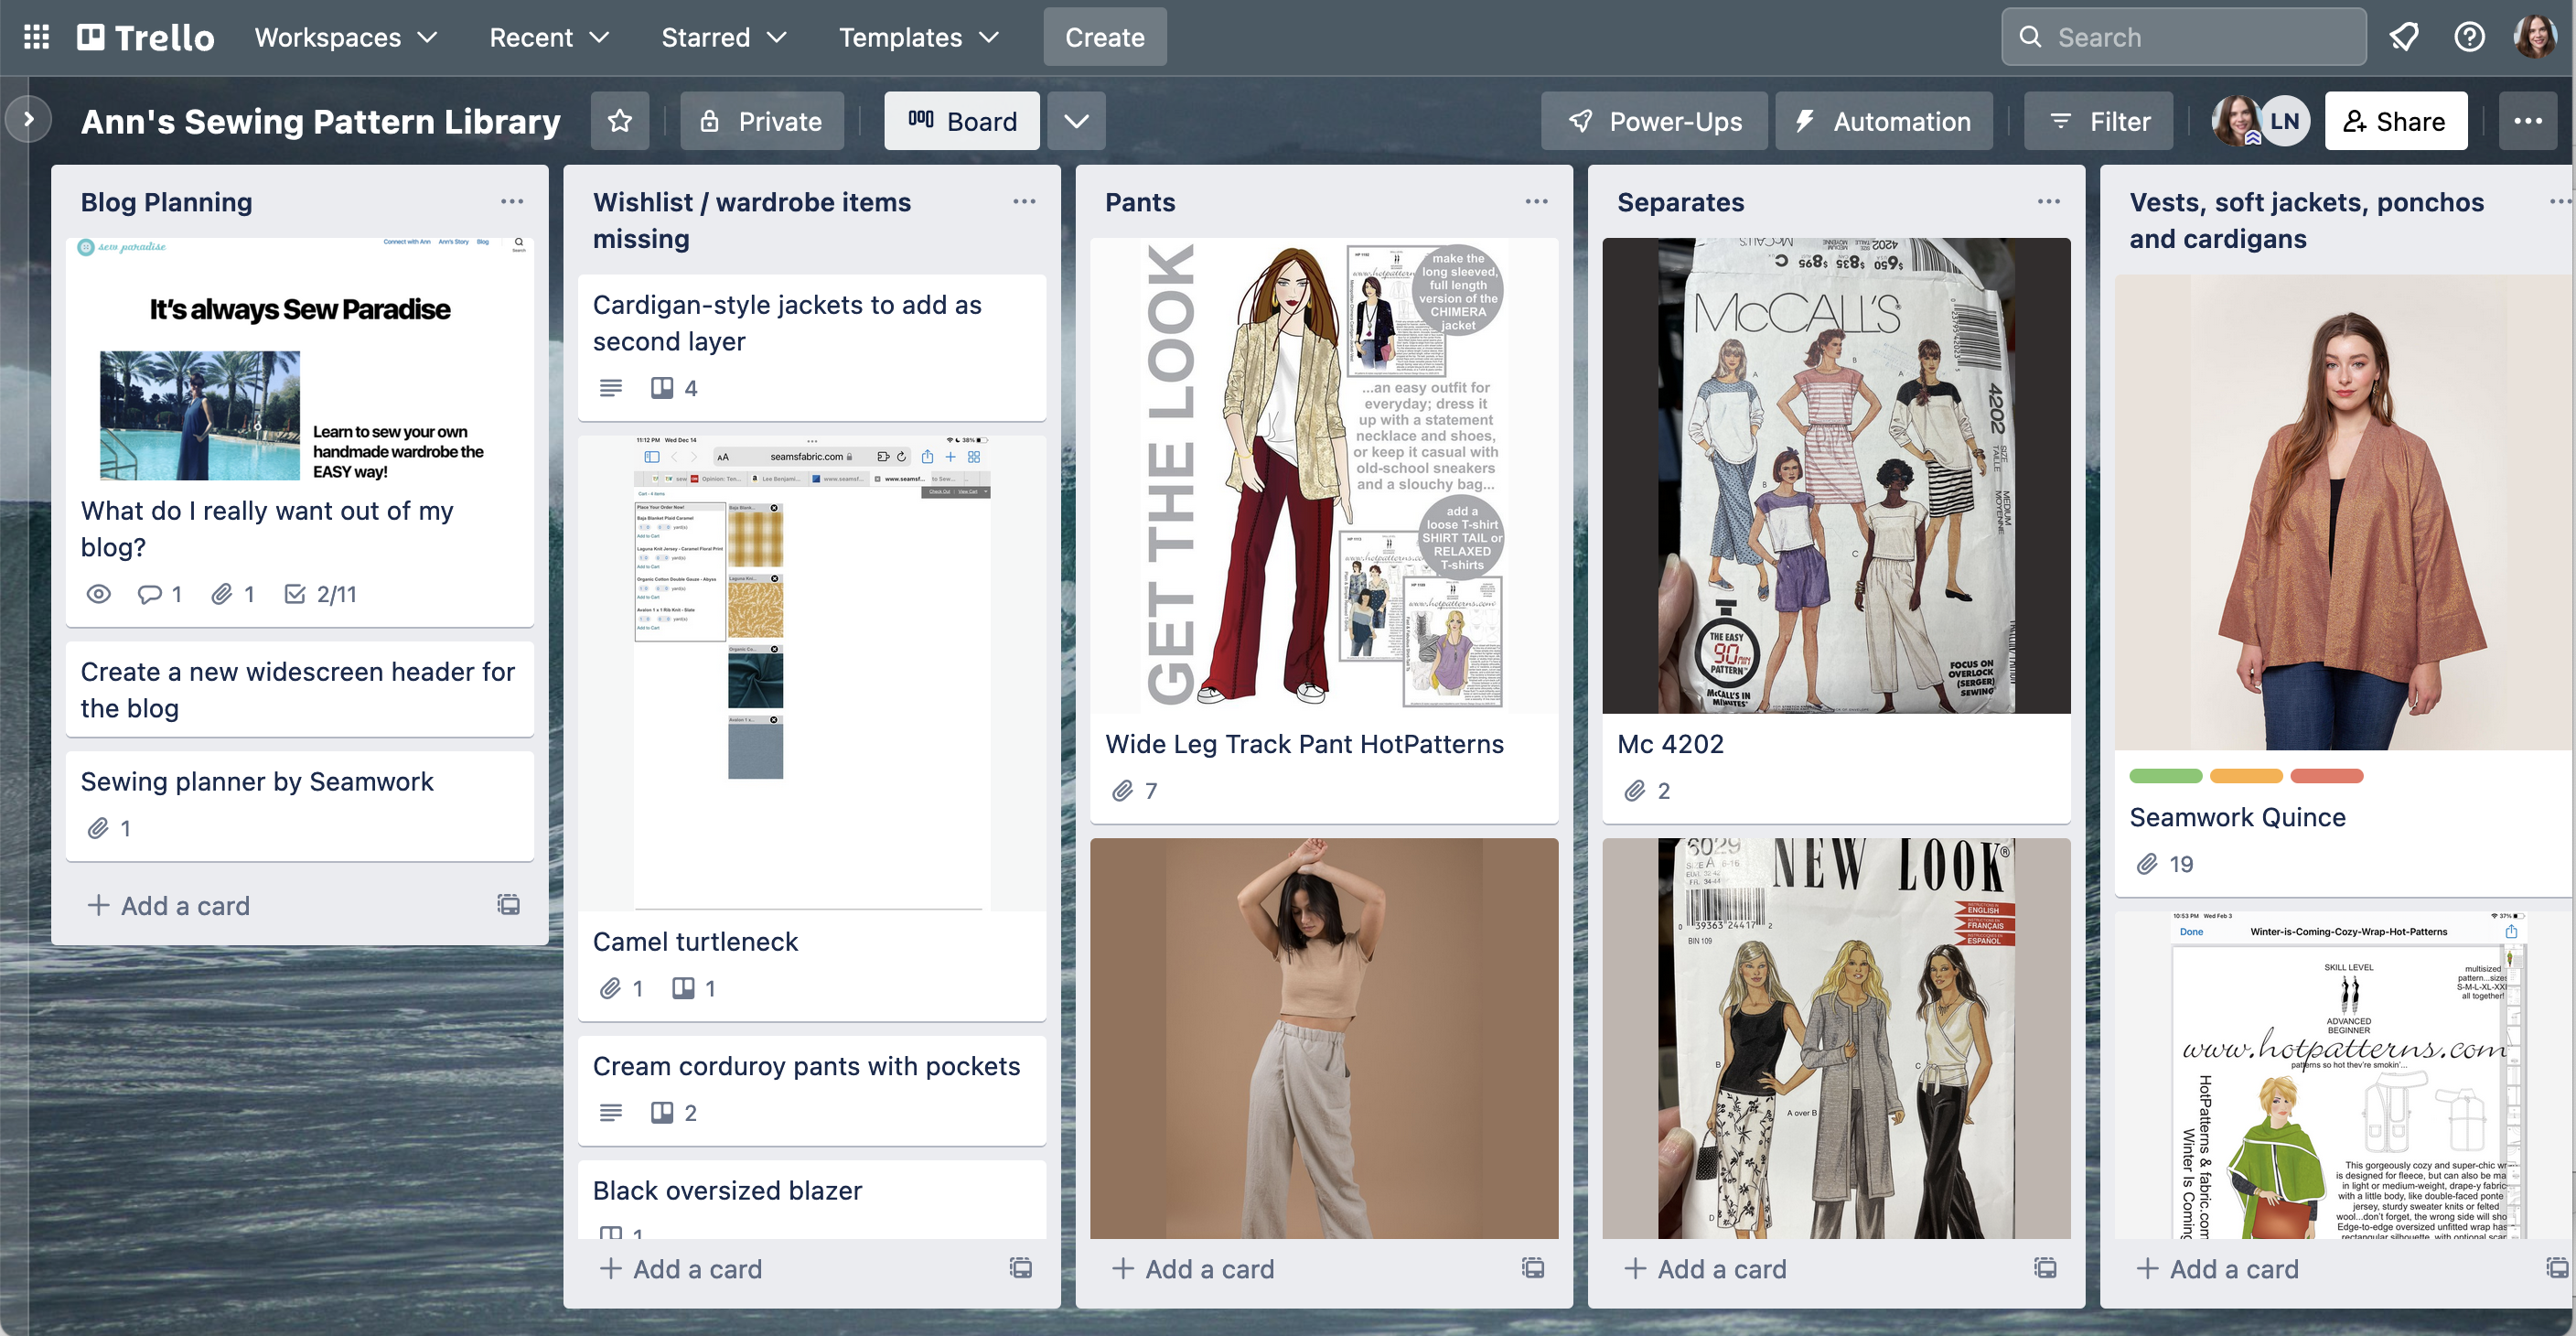 Using Trello to organize sewing patterns